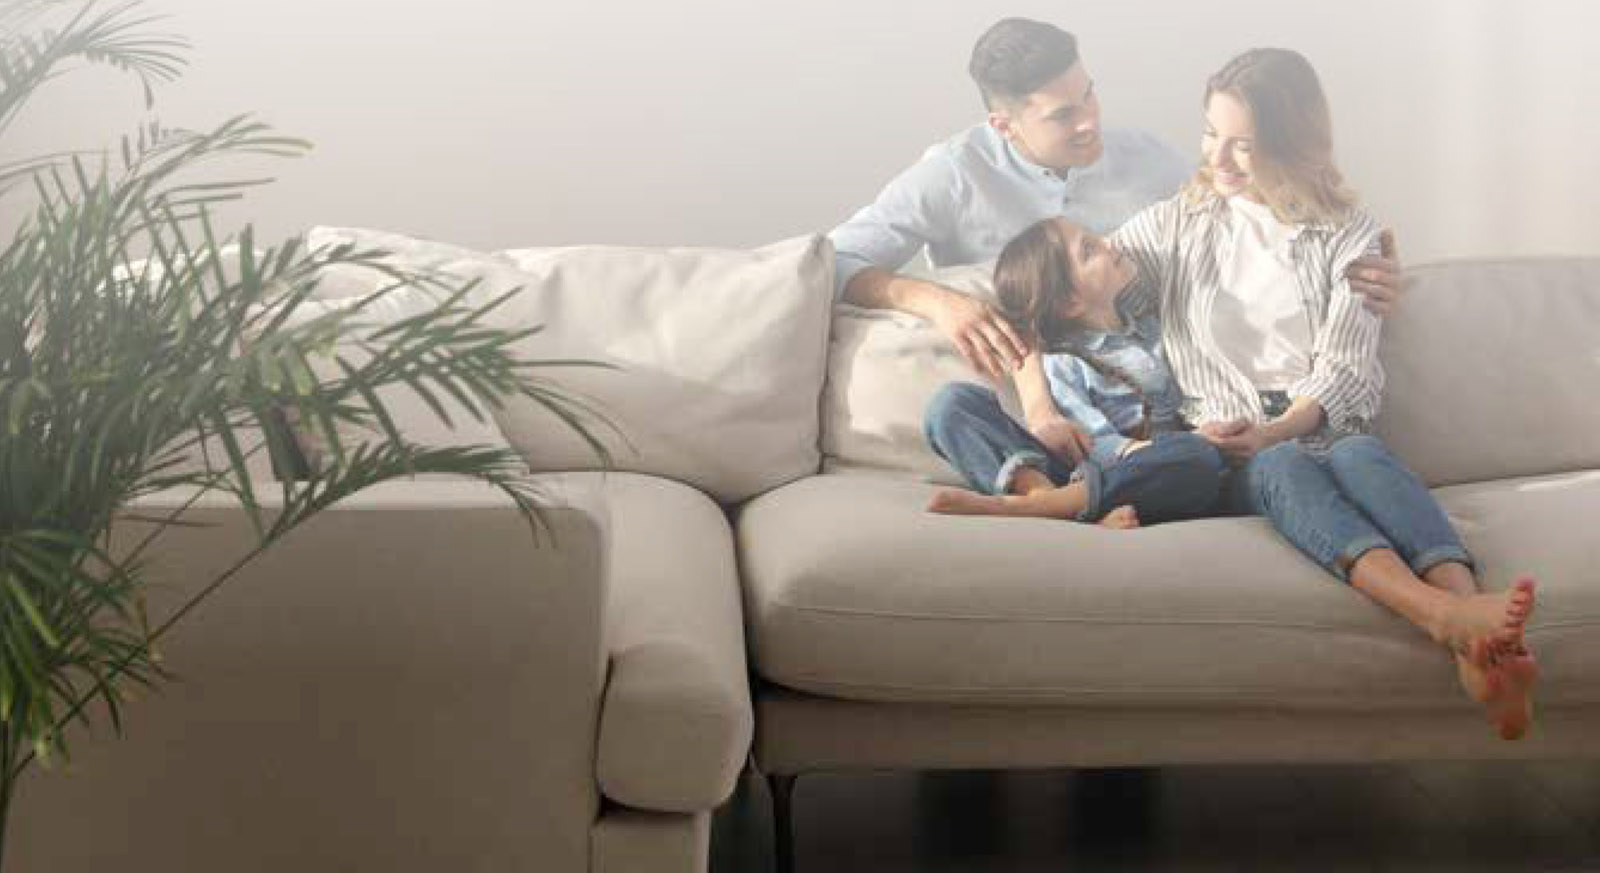 Family on couch